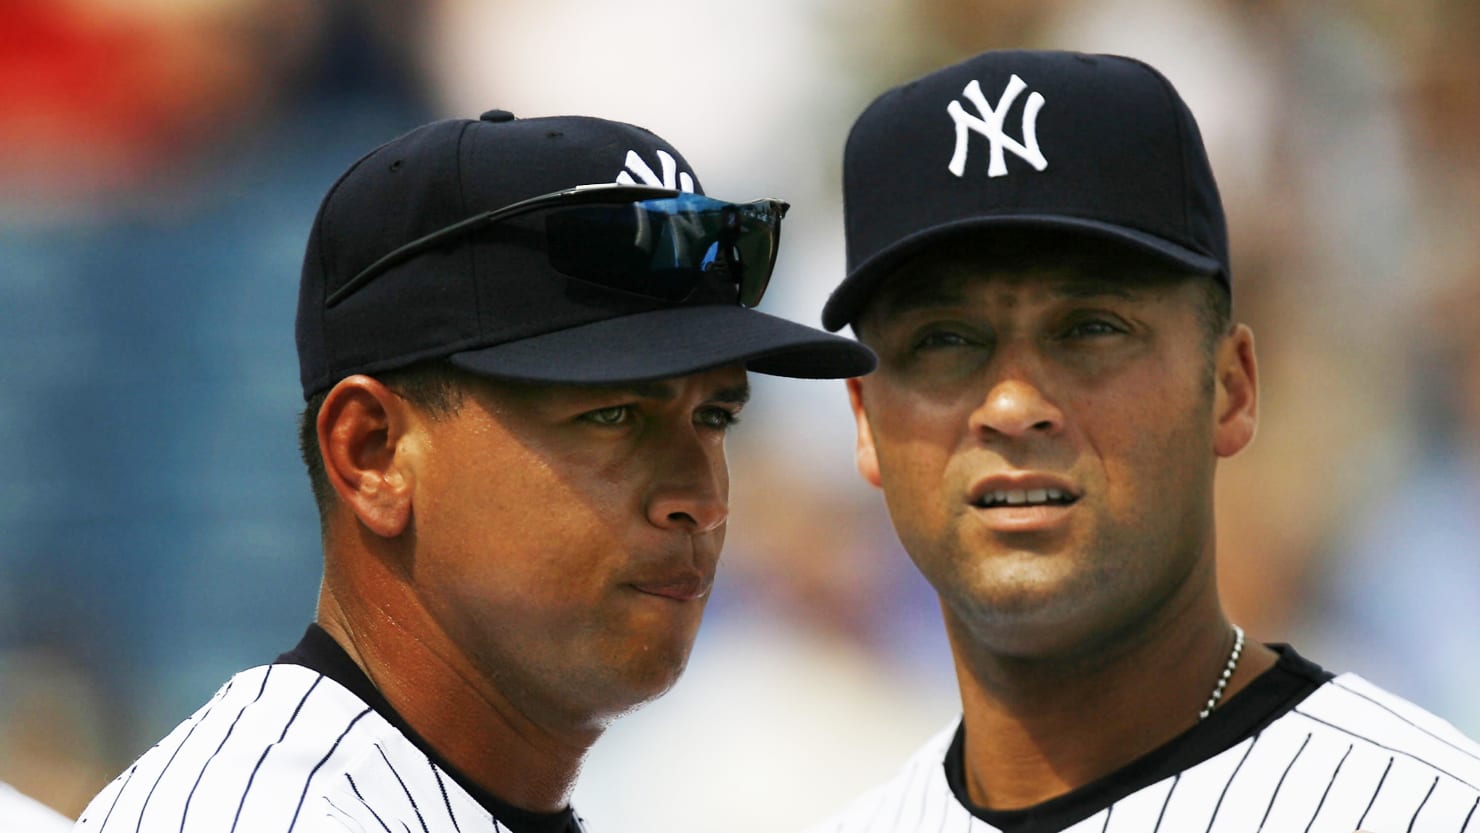 Derek Jeter and Alex Rodriguez pose for a photo during MTVs Eight News  Photo - Getty Images